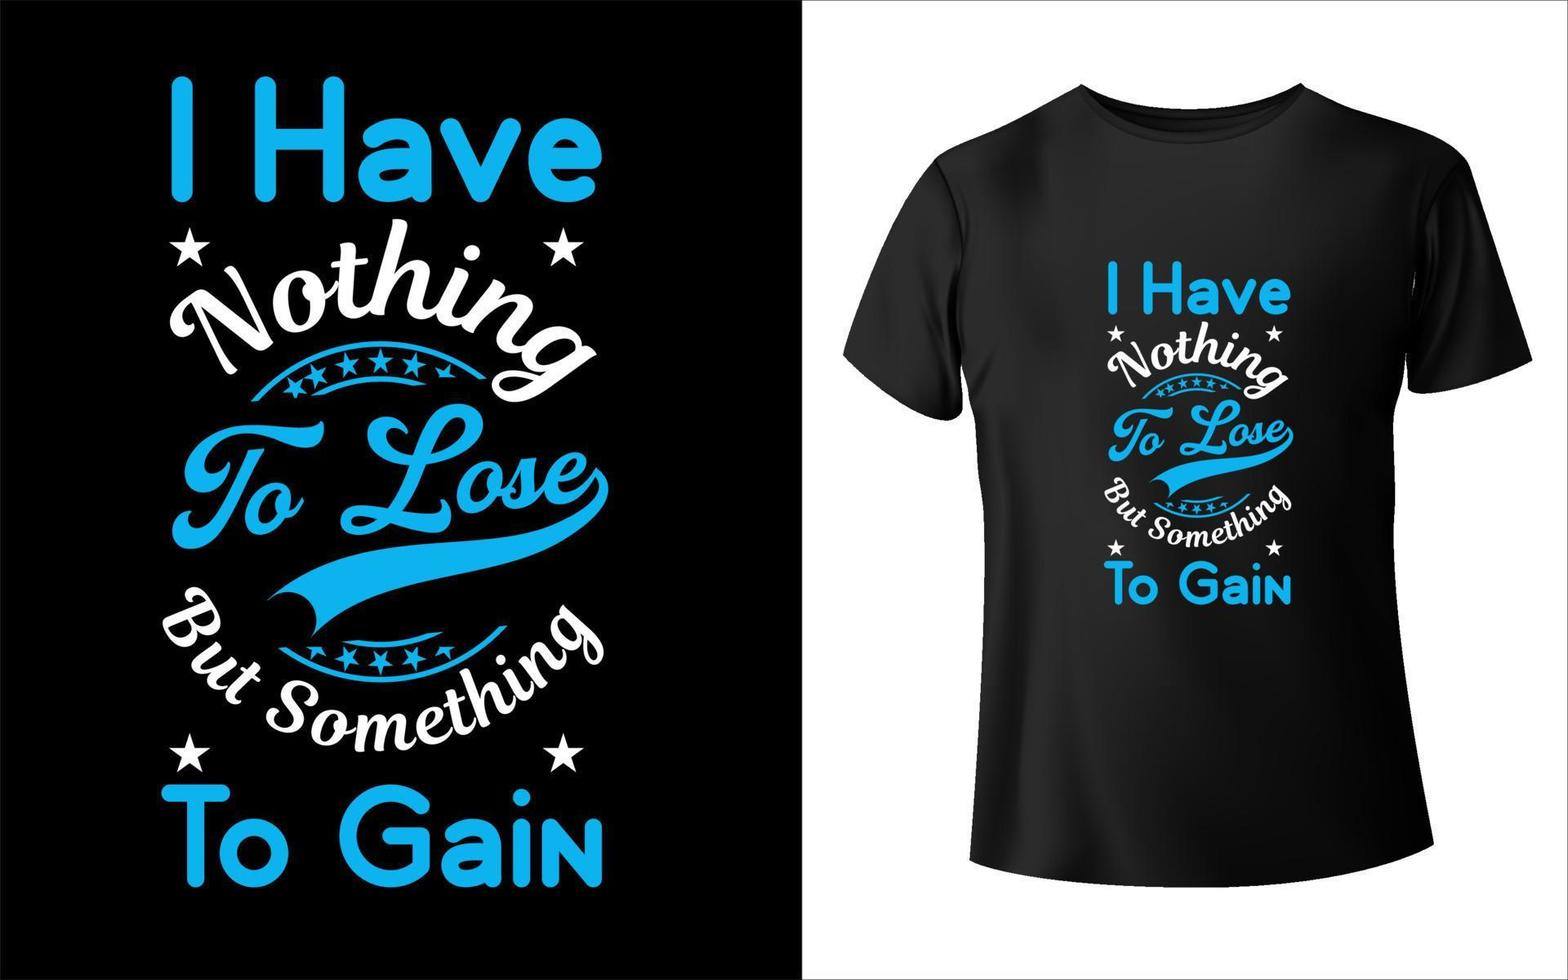 I have nothing to lose but something to gain t-shirt design vector